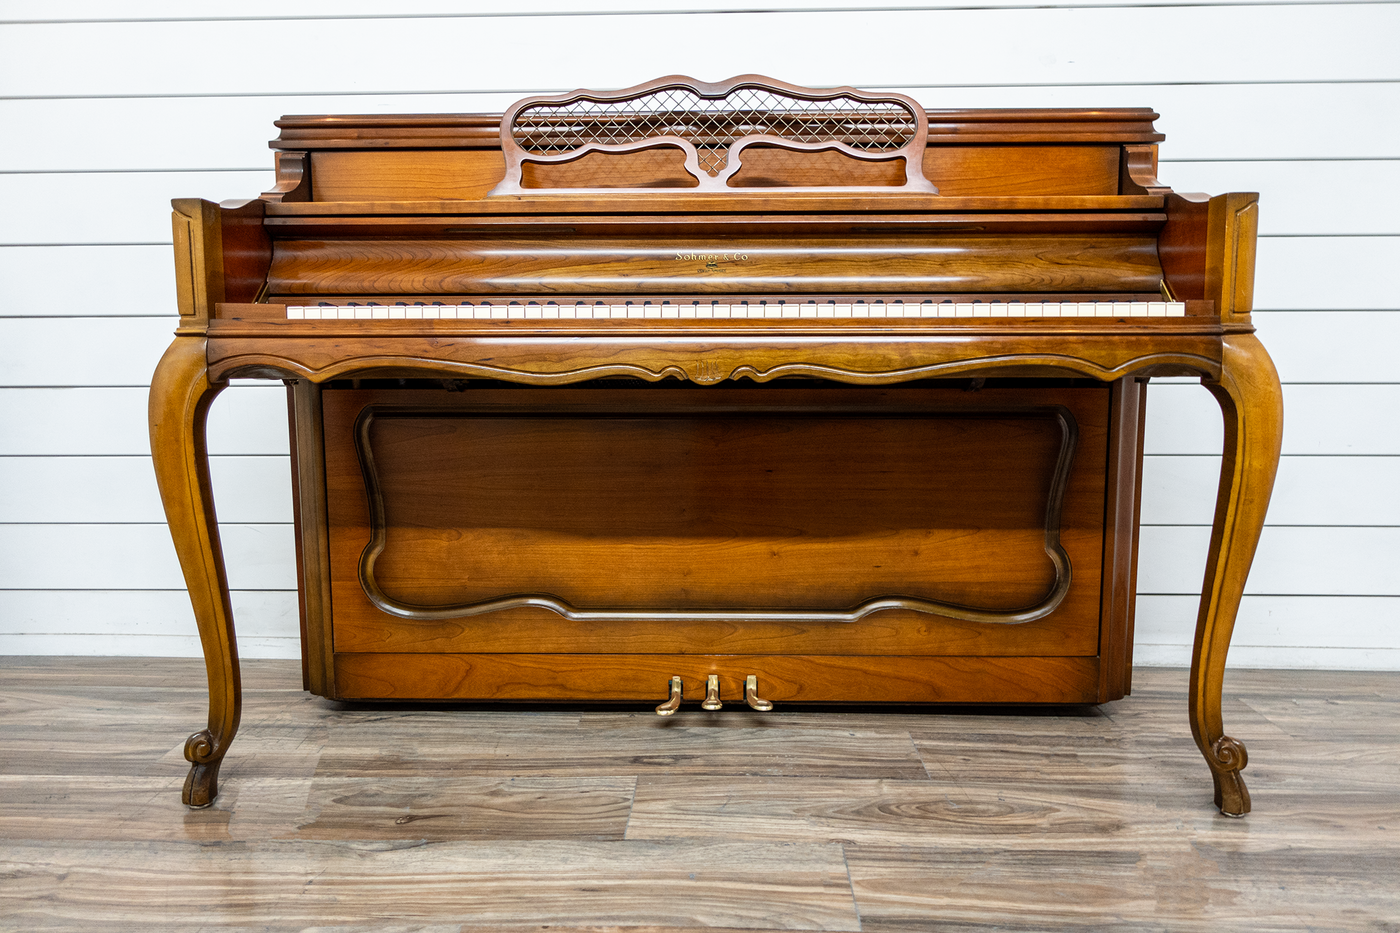 Somer & Co #34 Upright Piano